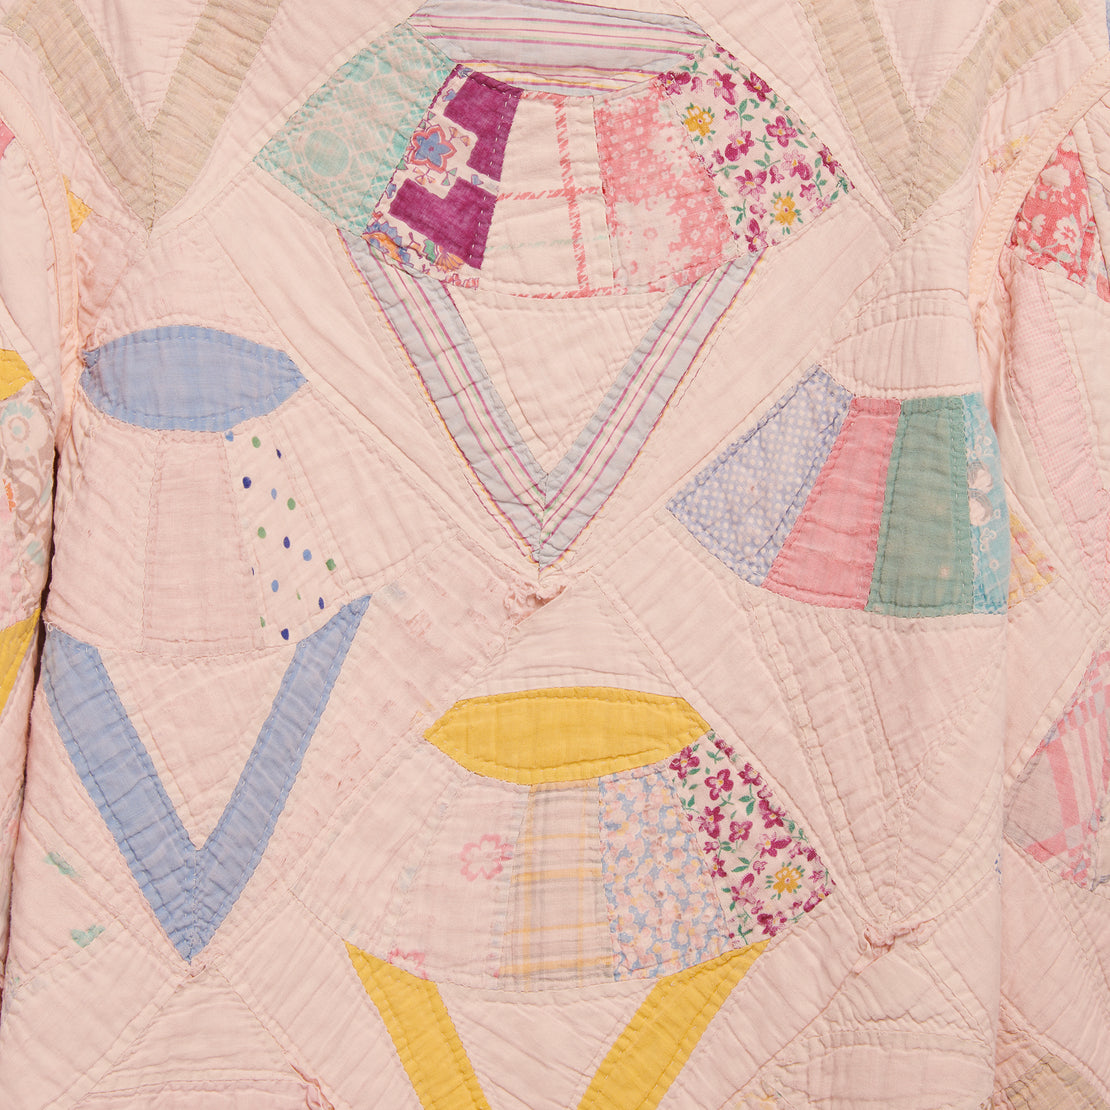 Quilt Liner Jacket - Pink Overdye, Multi-Color Fans - Carleen - STAG Provisions - W - Outerwear - Coat/Jacket